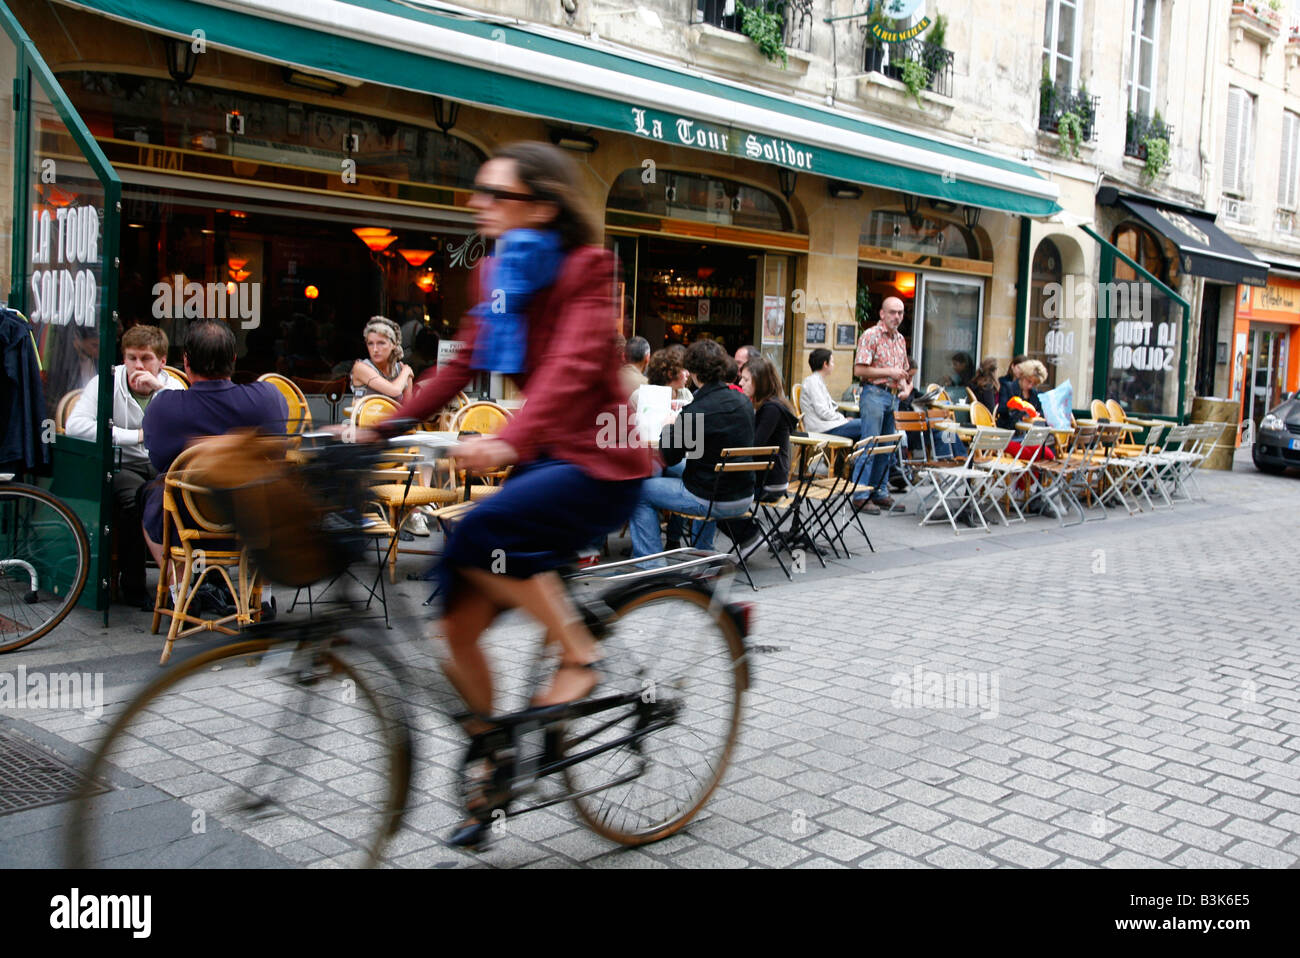 July 2008 - People sitting at an outdoors cafe in Caen Normandy France Stock Photo